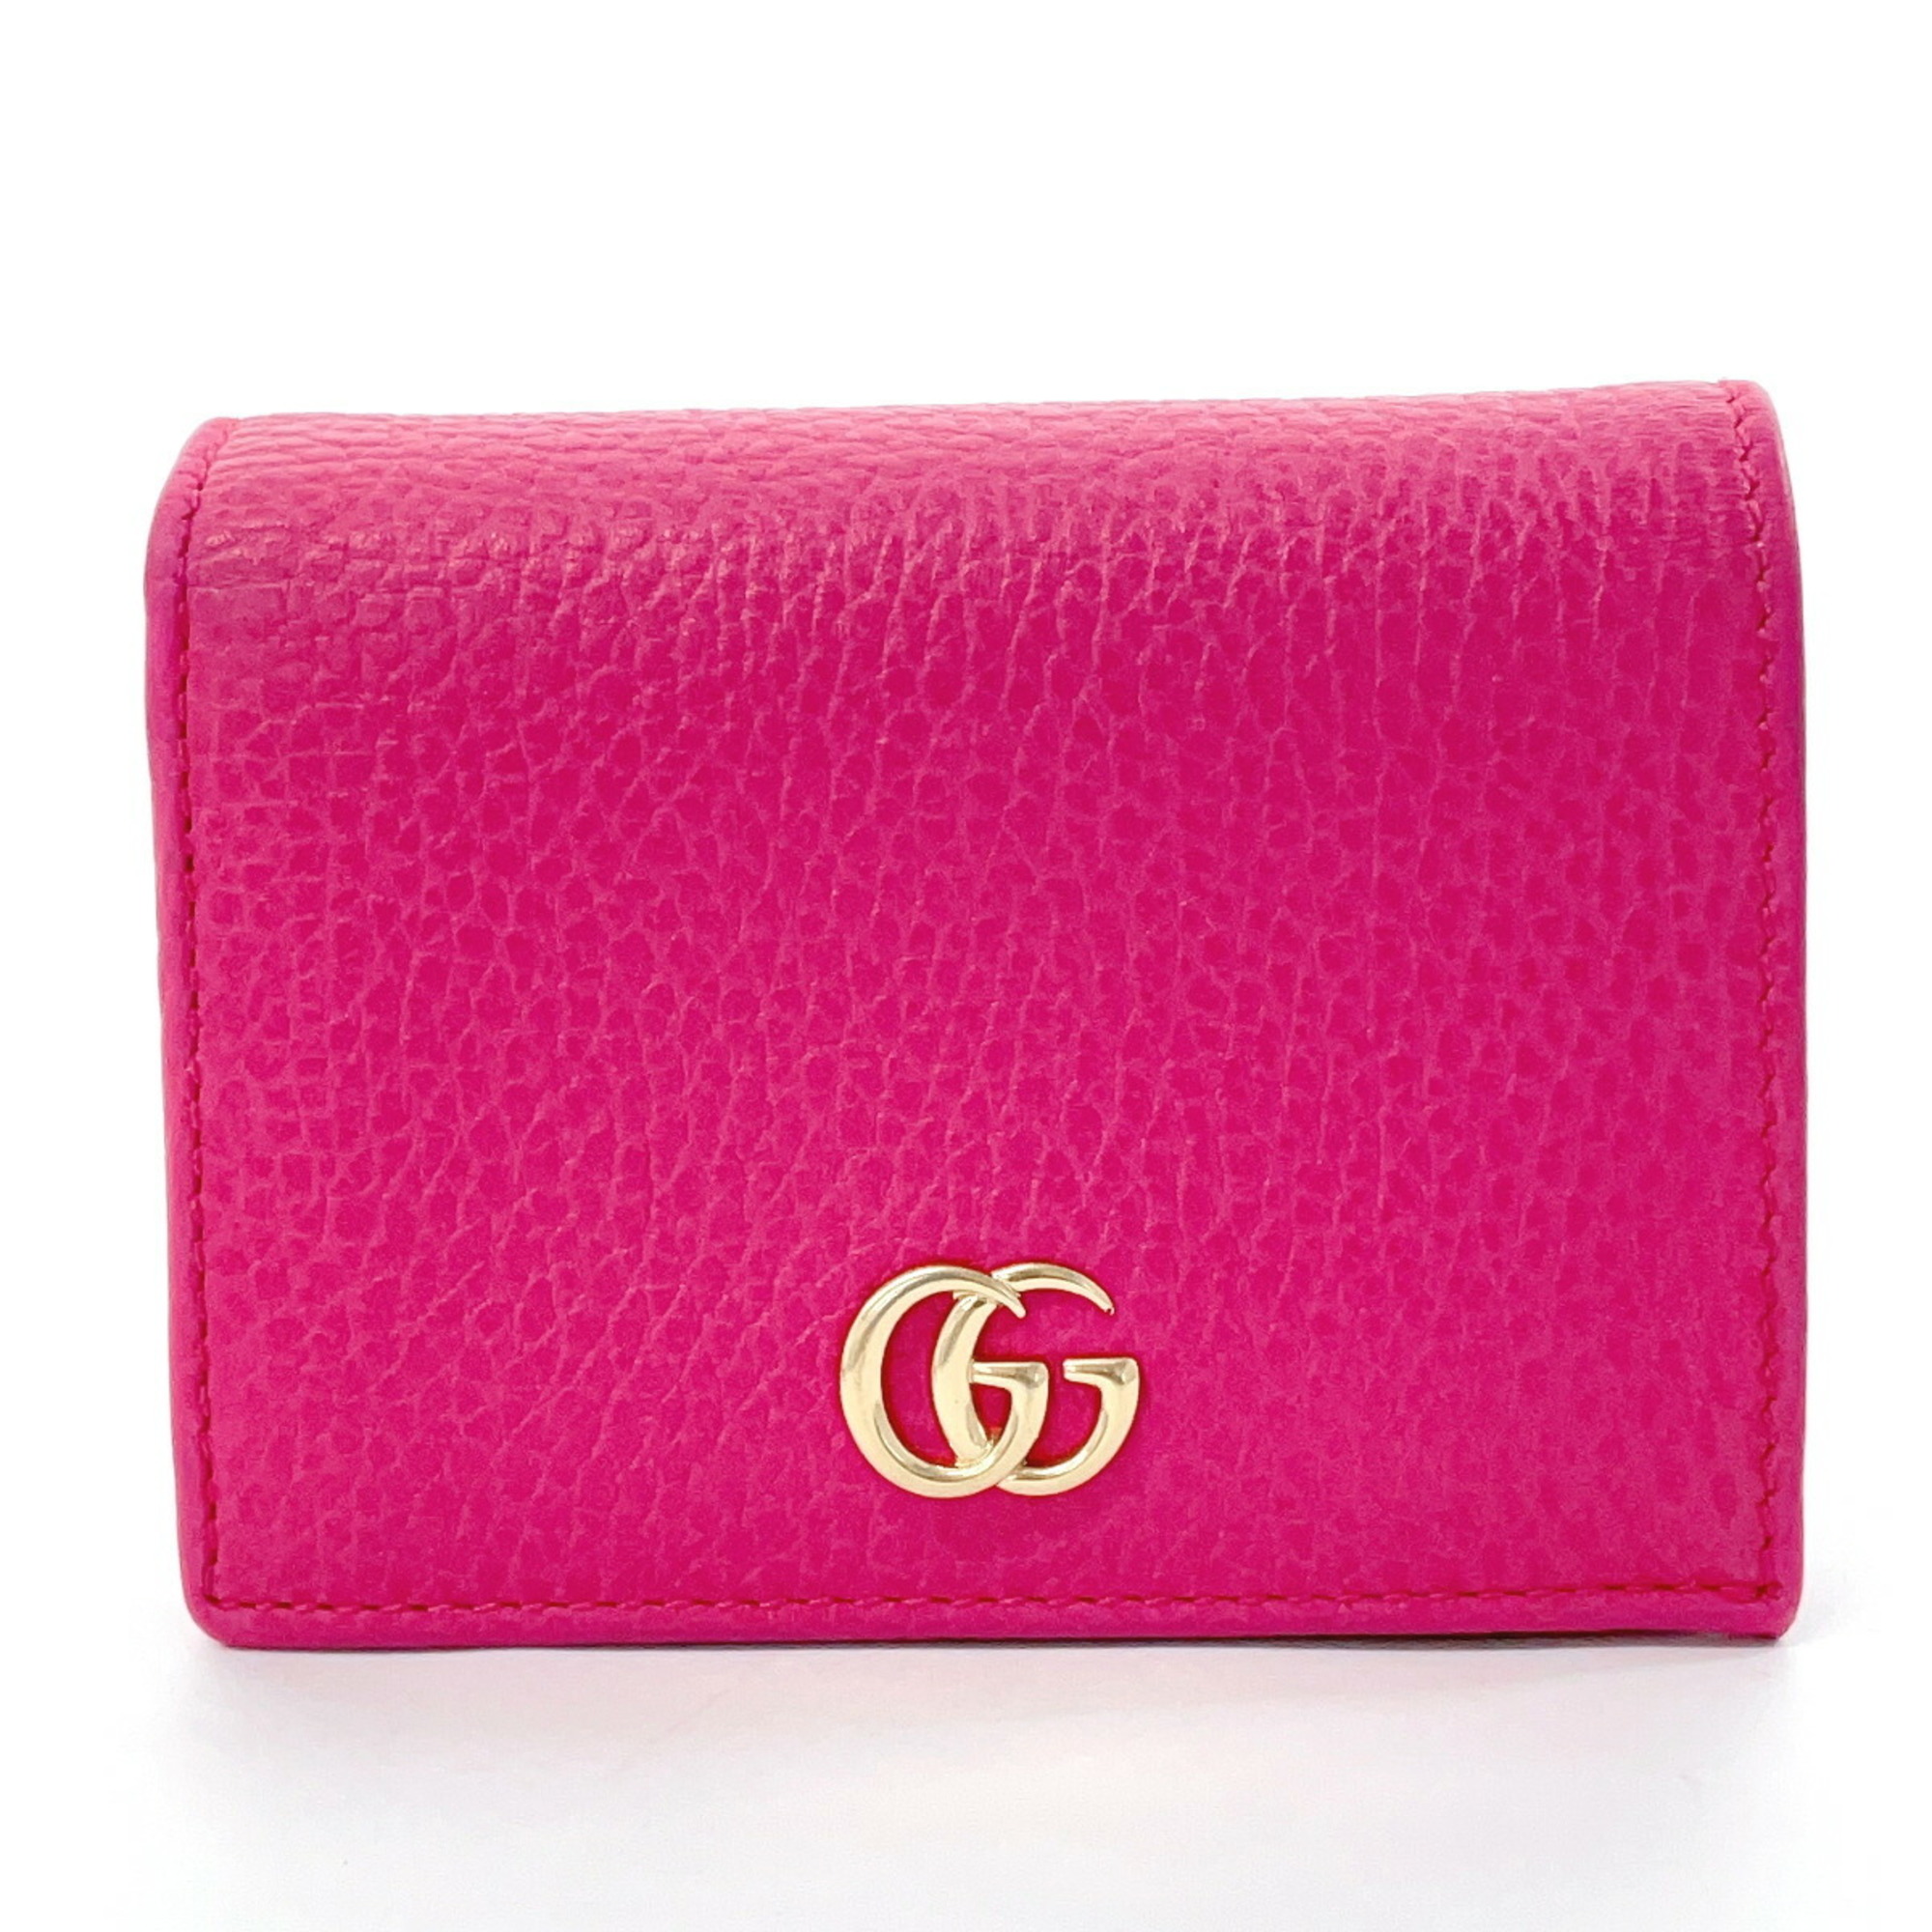 GUCCI GG Marmont 456126 Bi-fold wallet Leather Pink Women's F4034429